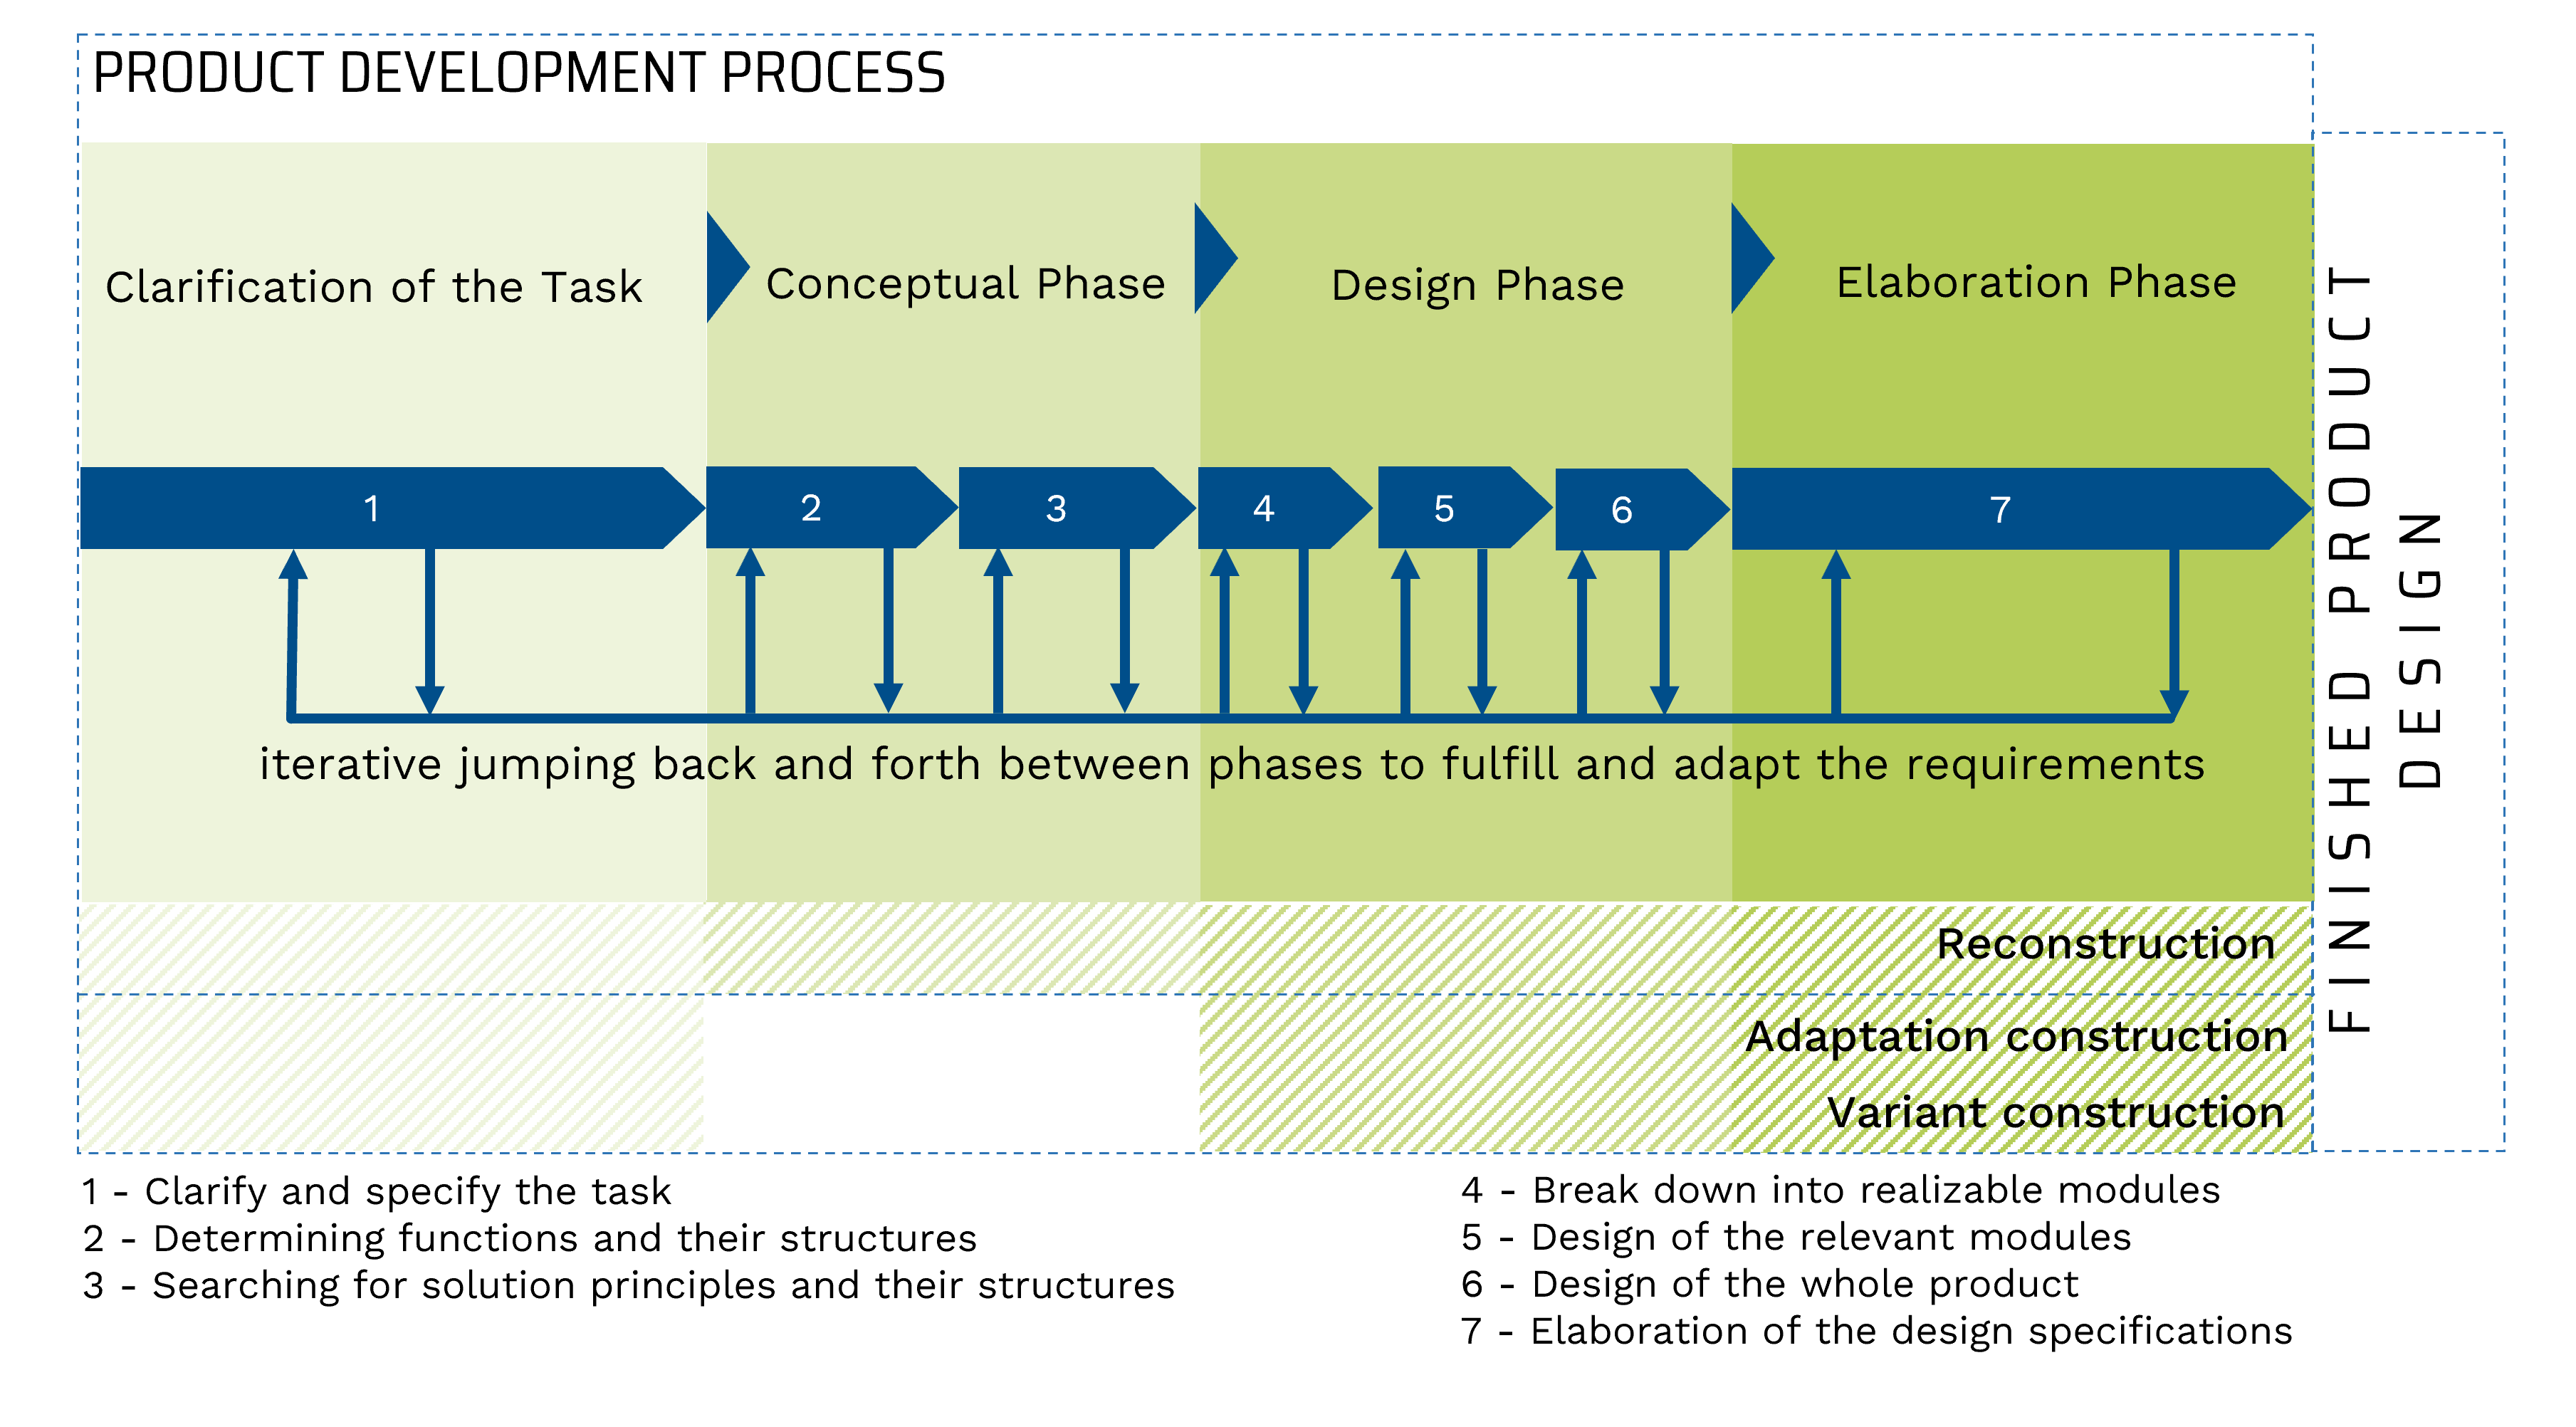 The figure breaks down the general product development process with main phases (clarifying the task, concept phase, design phase and elaboration phase) and the associated individual activities.